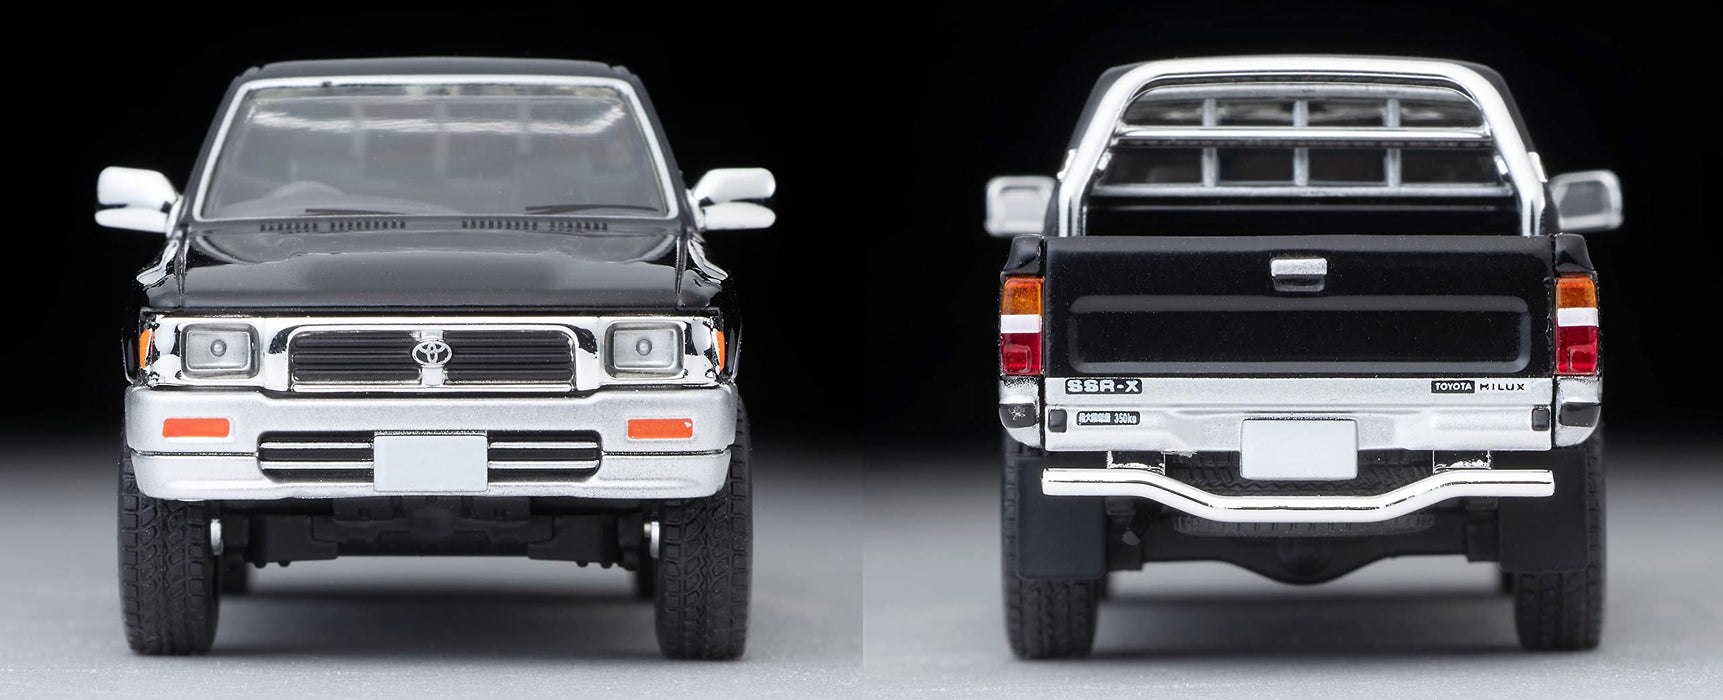 Tomytec 1/64 Toyota Hilux 1995 Double Cab SSR-X 4WD Pickup - Black/Silver